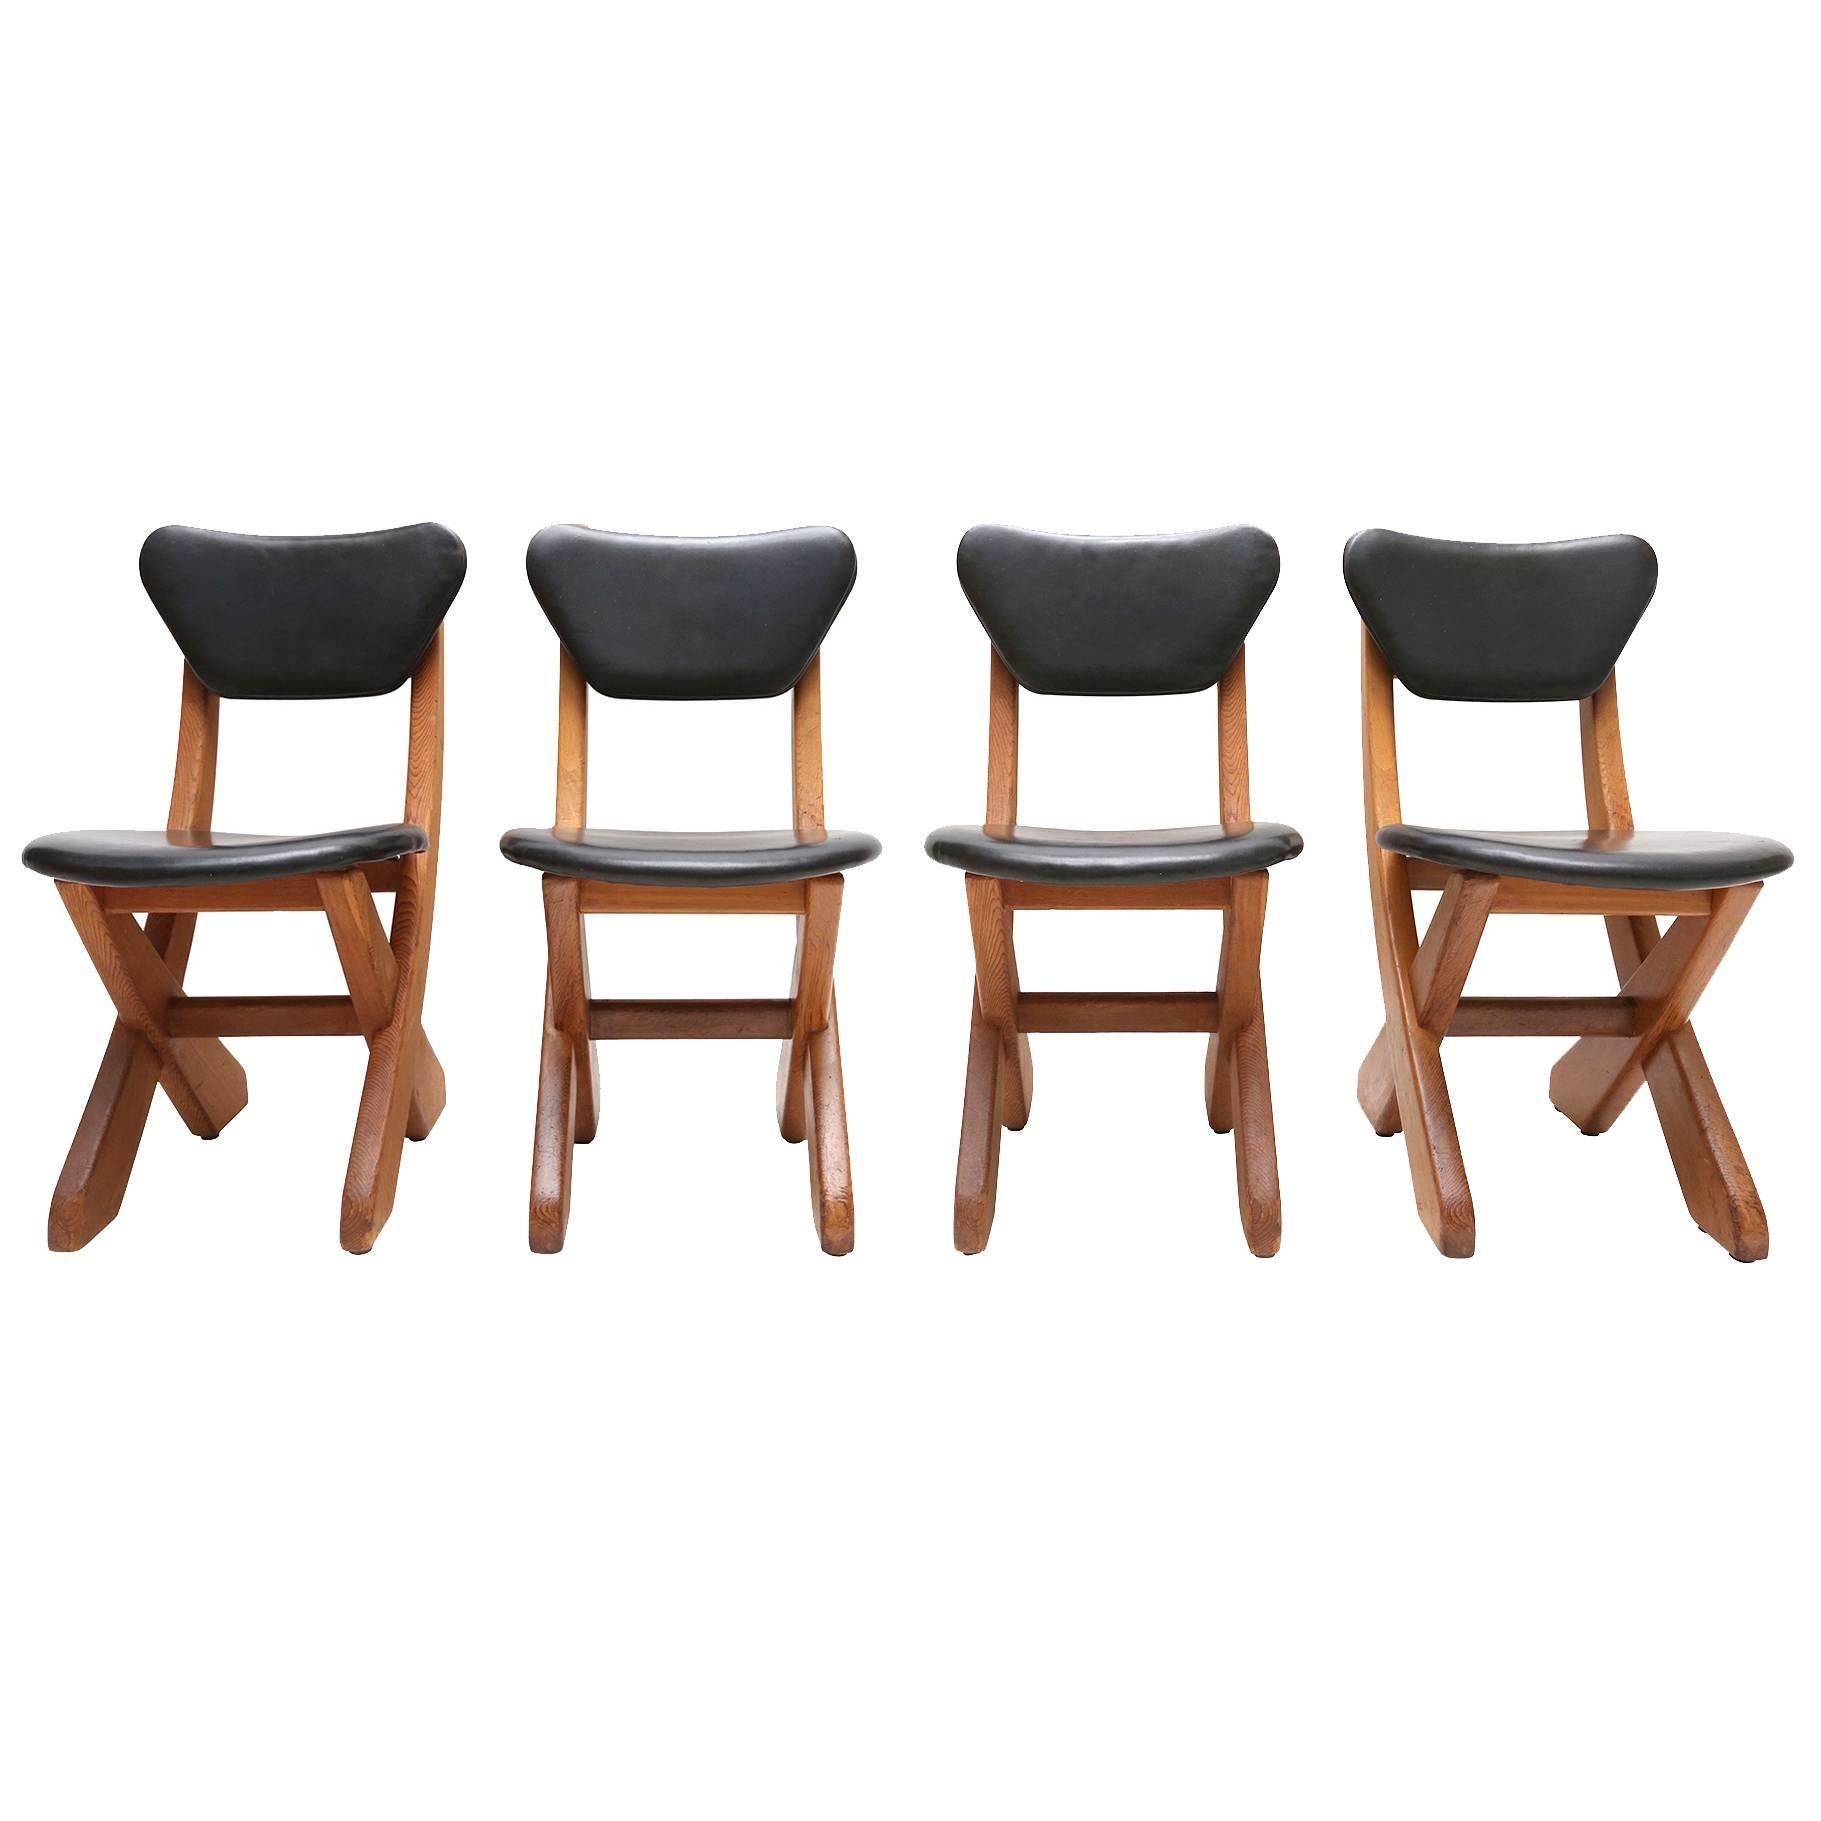 Naive 'wabi sabi' dining chairs, France, 1960s

would fit well in a Brutalist or rustic inspired interior. 

              